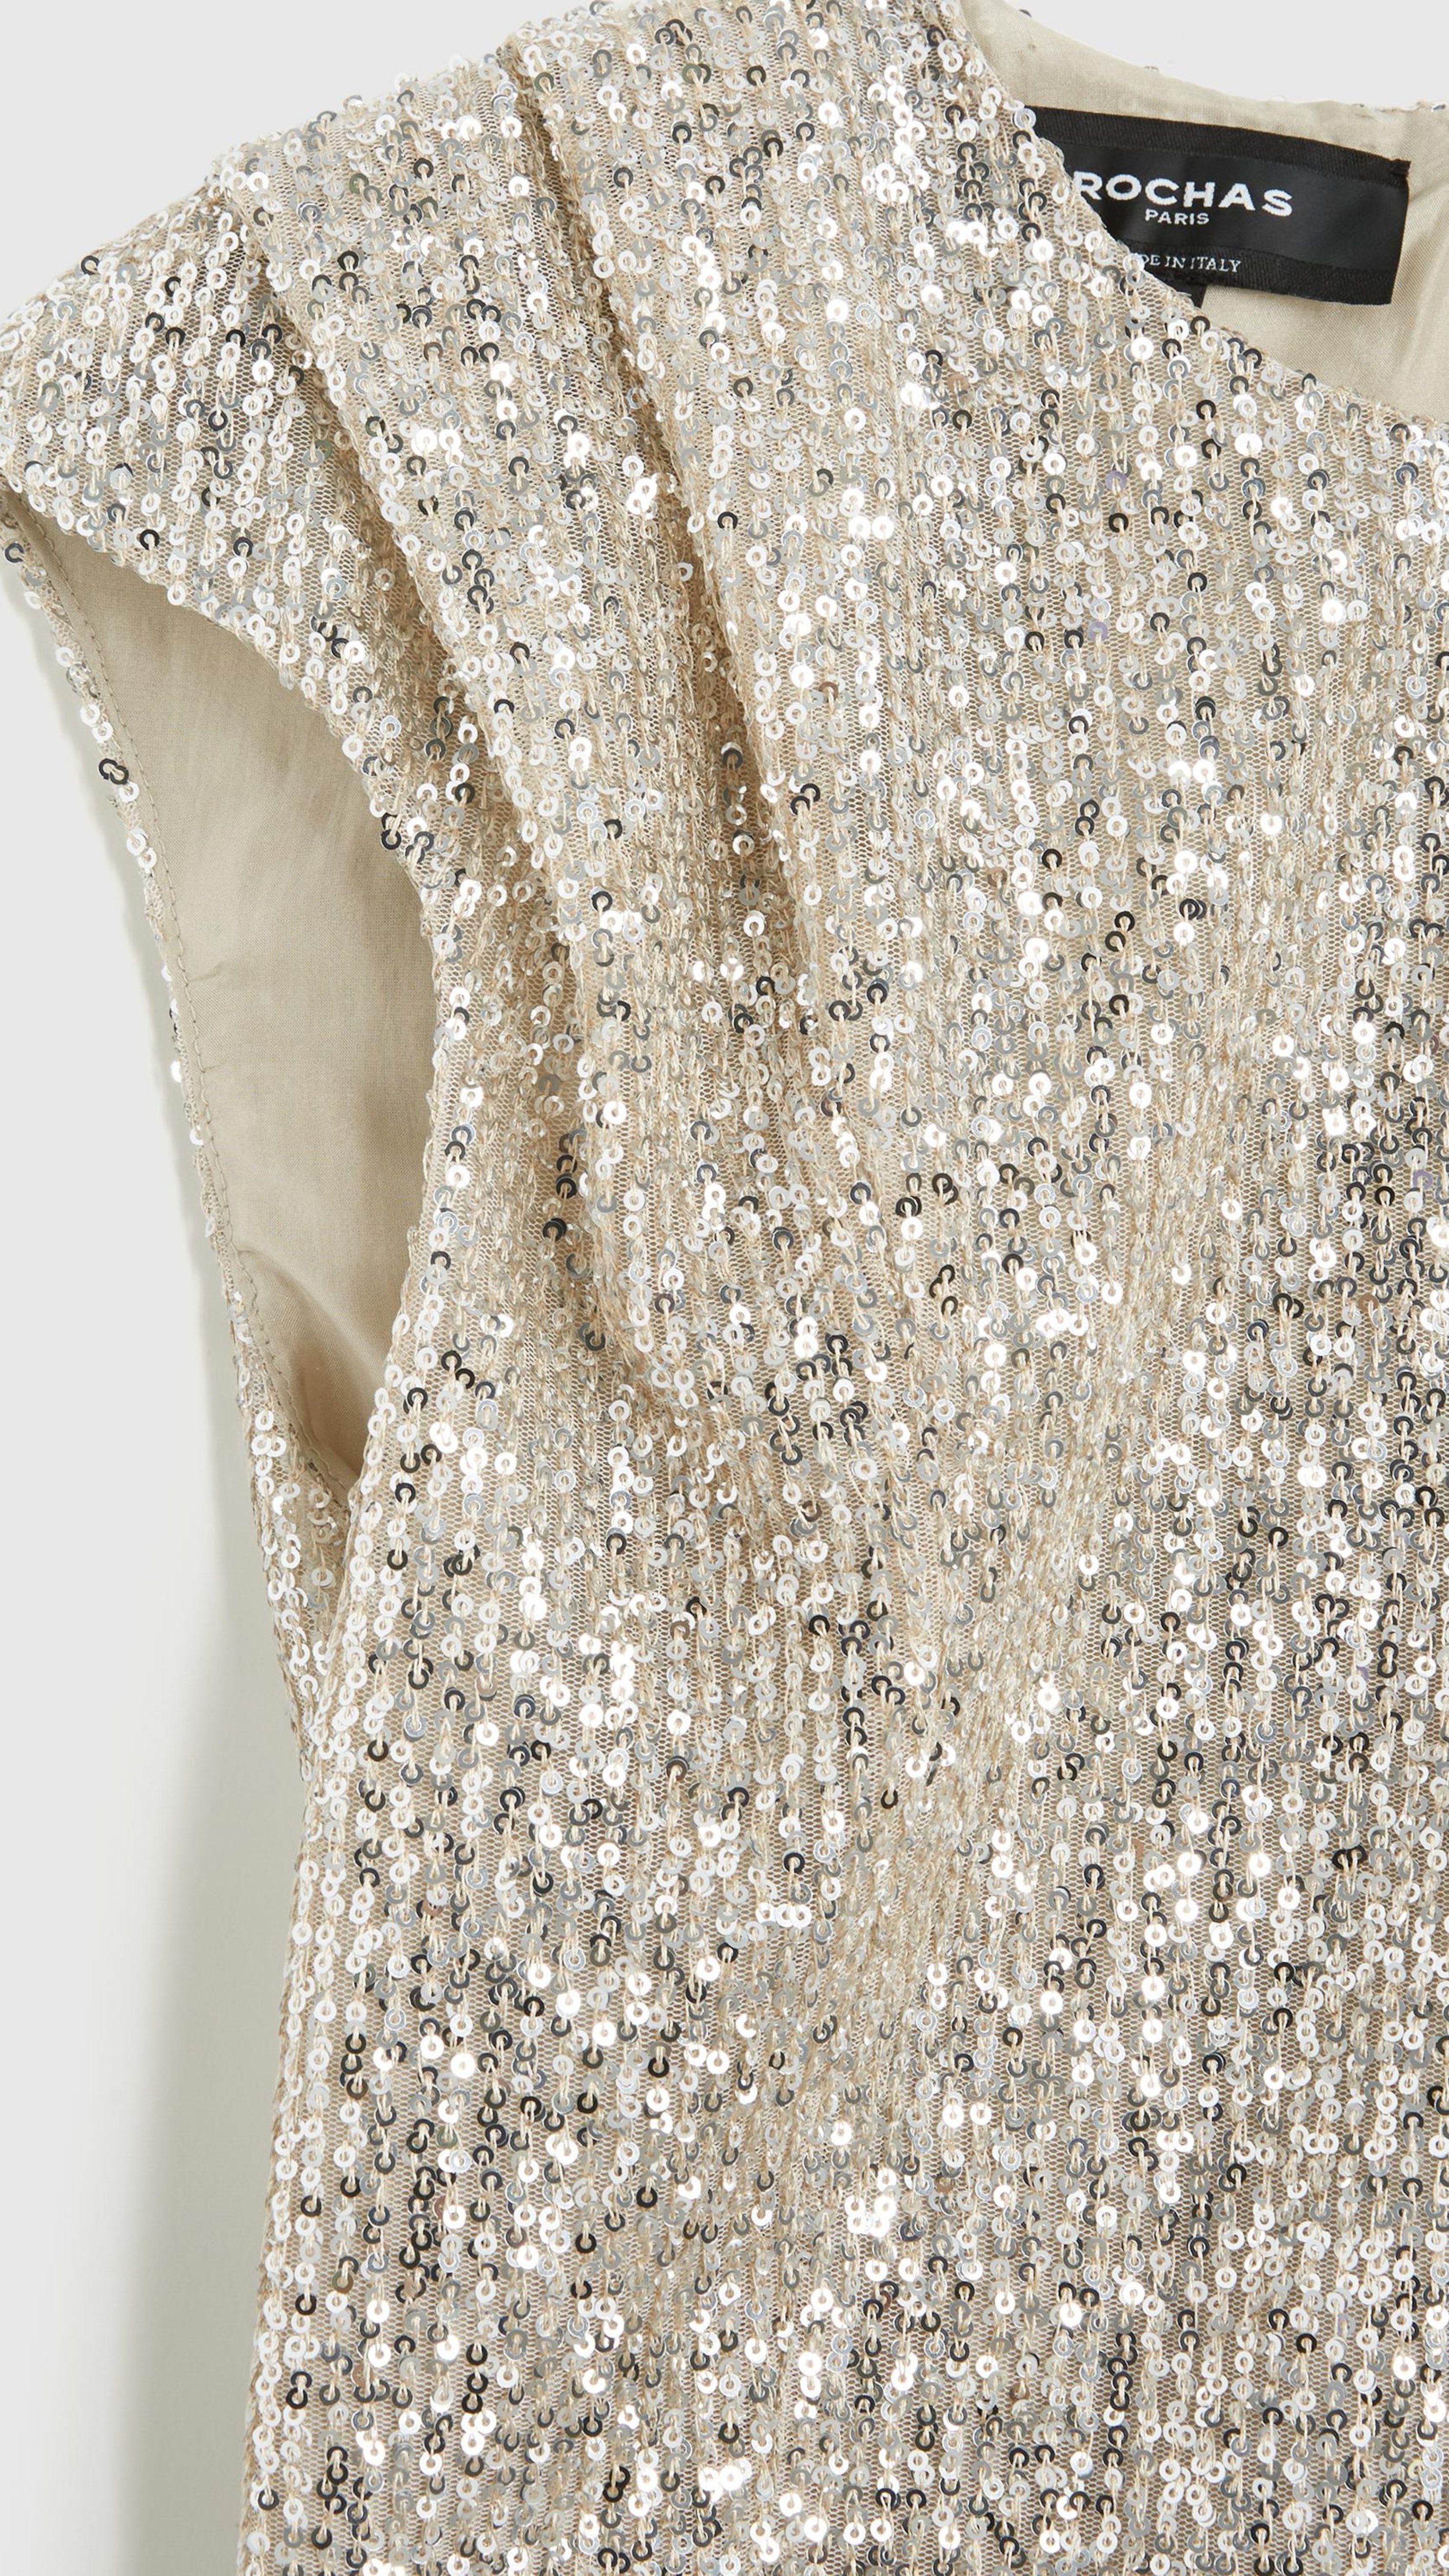 Rochas Paris Fashion Rounded Collar Sparkle Top Fitted Sleeveless Blouse with pleated shoulders in a silver sequins. Detail photo showing material and shoulder